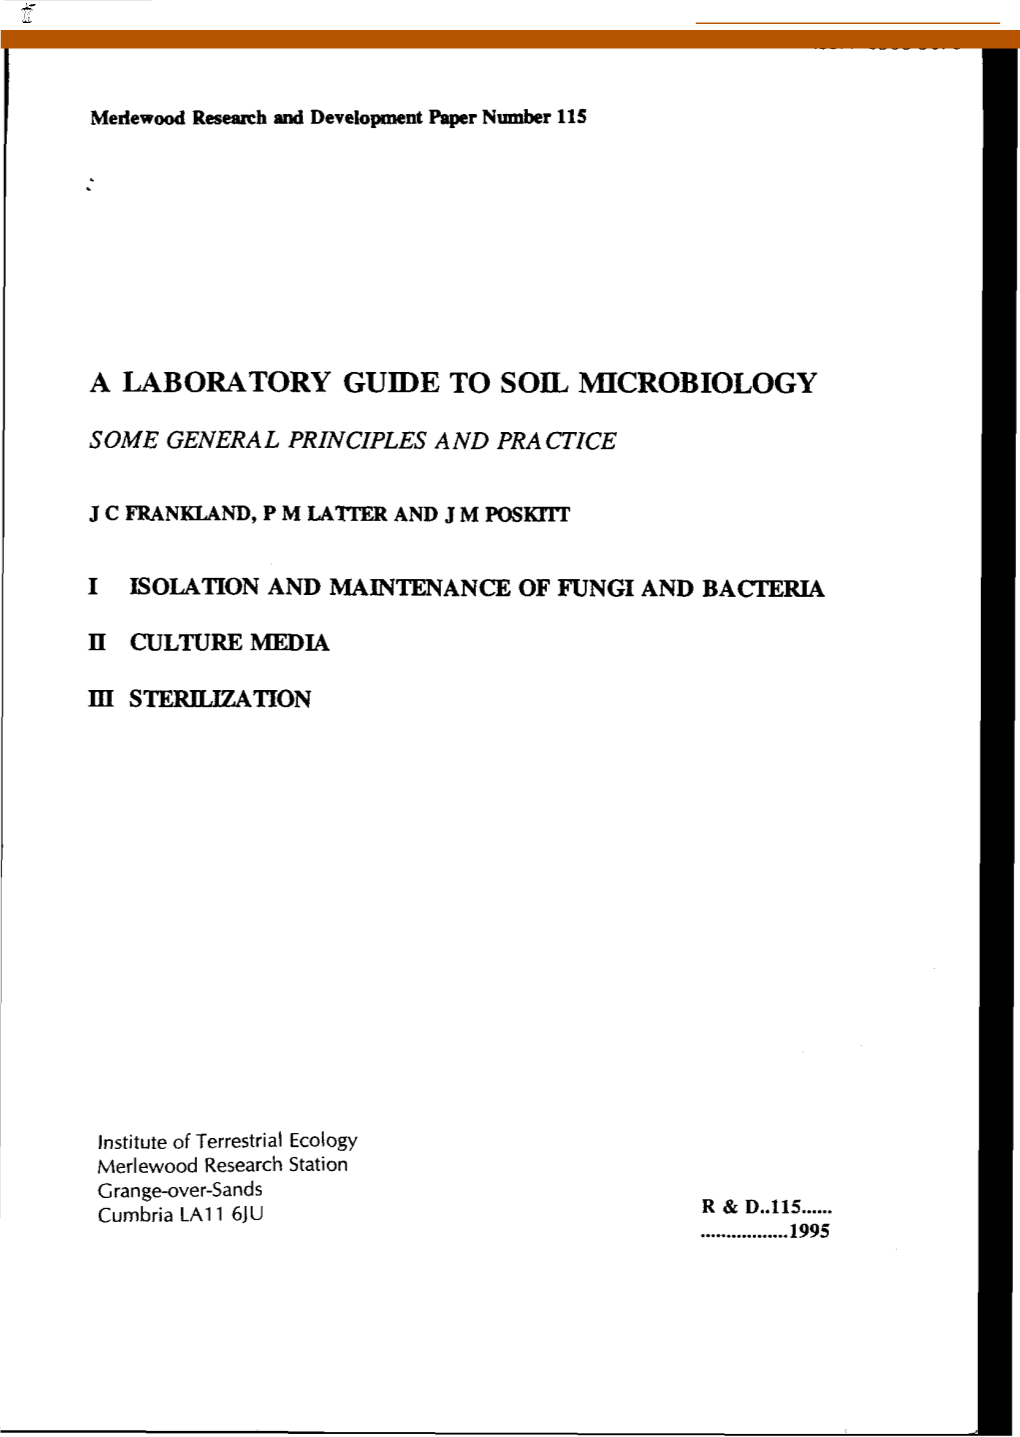 A Laboratory Guide to Soil Microbiology